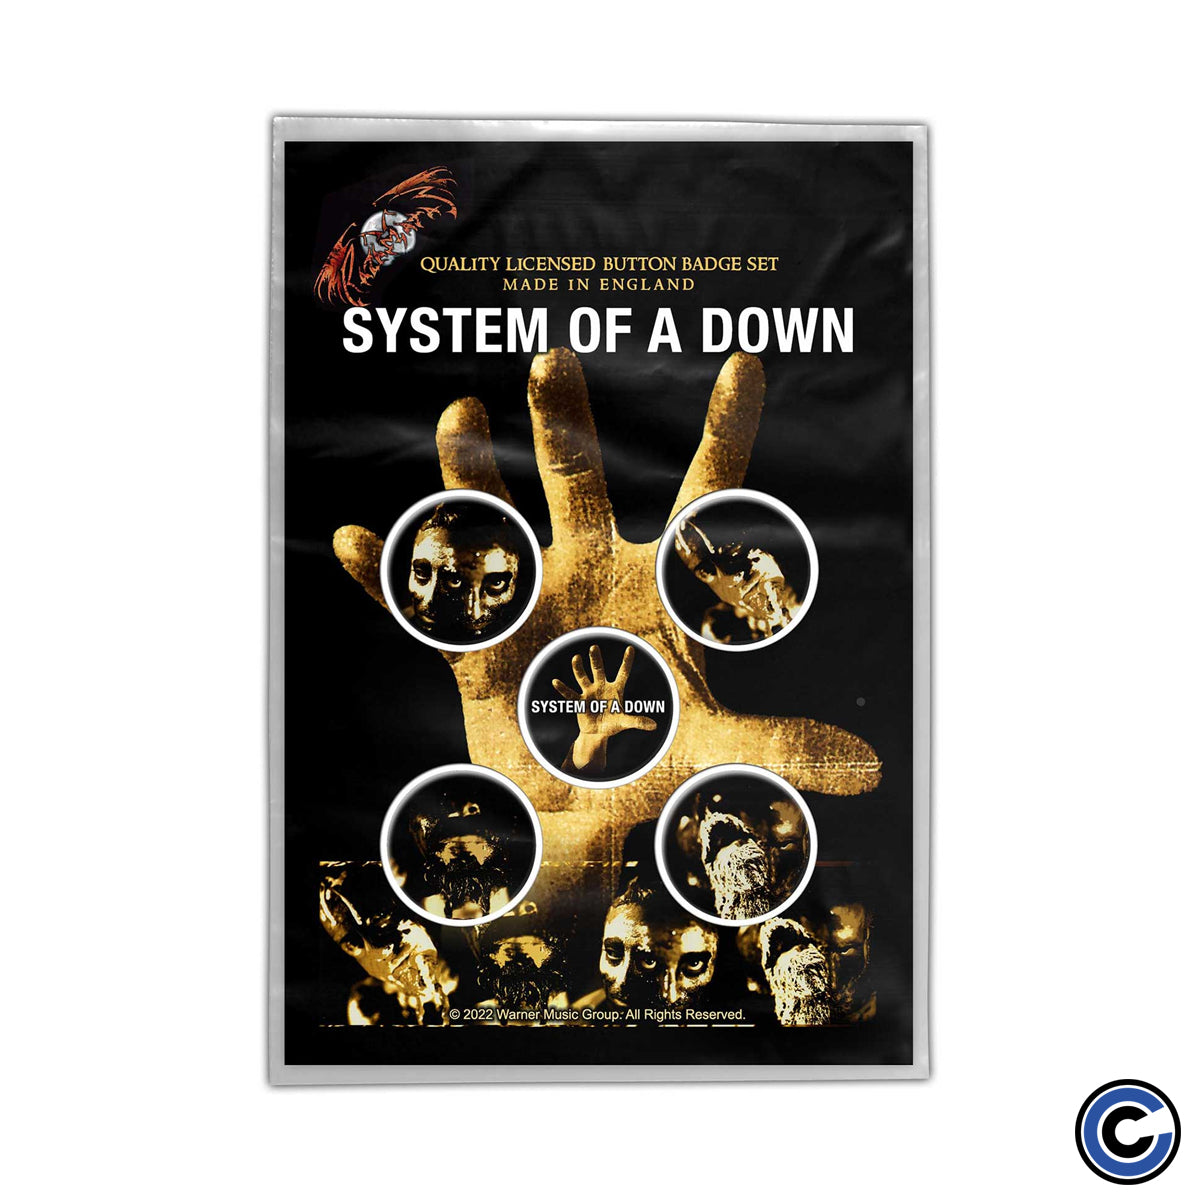 System Of A Down "Hand" Button Pack